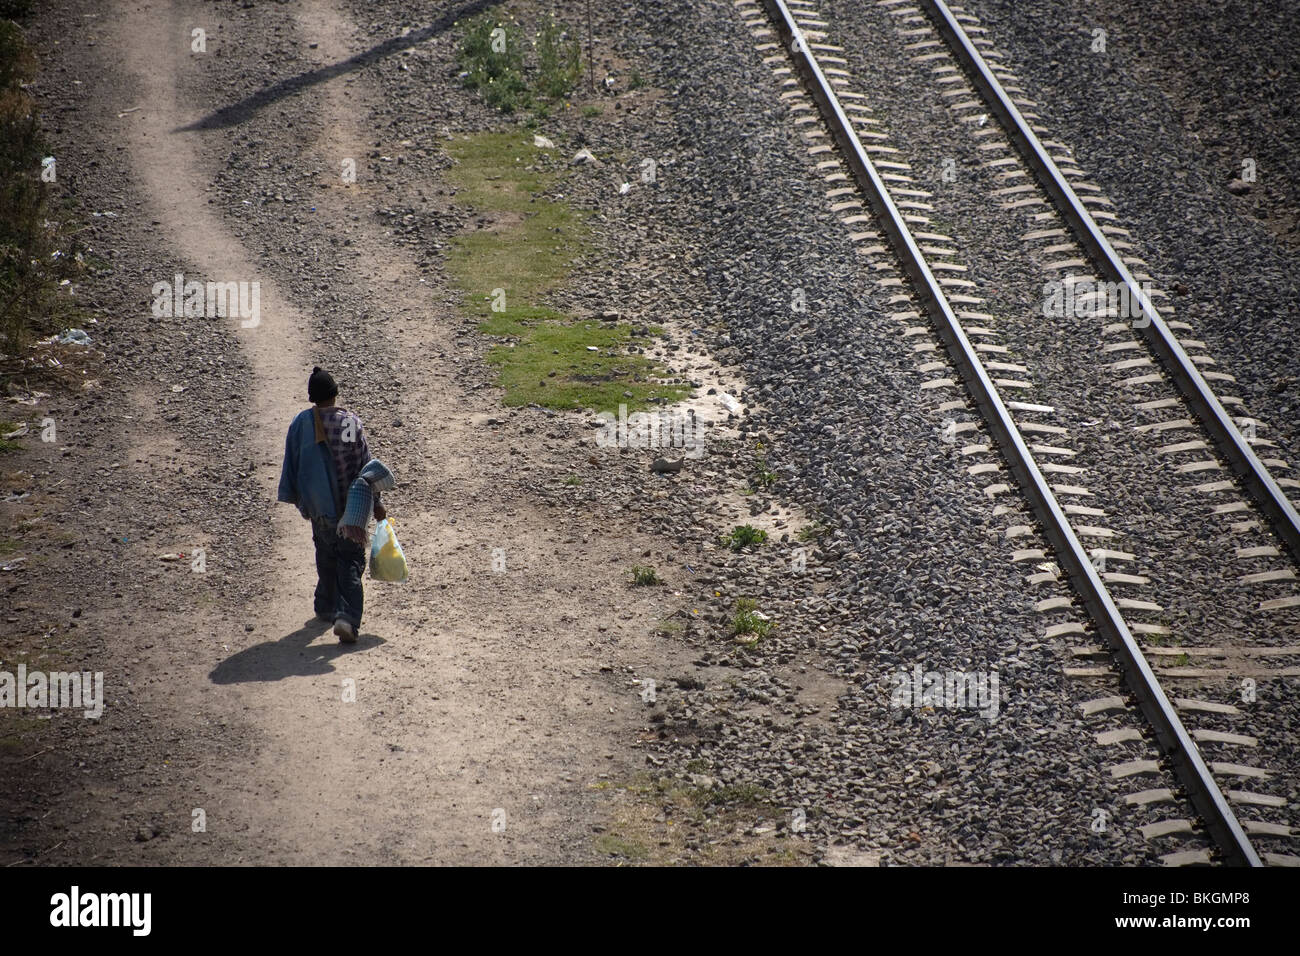 An undocumented Central American migrant traveling to work in the United States waits along the railroad tracks in Mexico City. Stock Photo